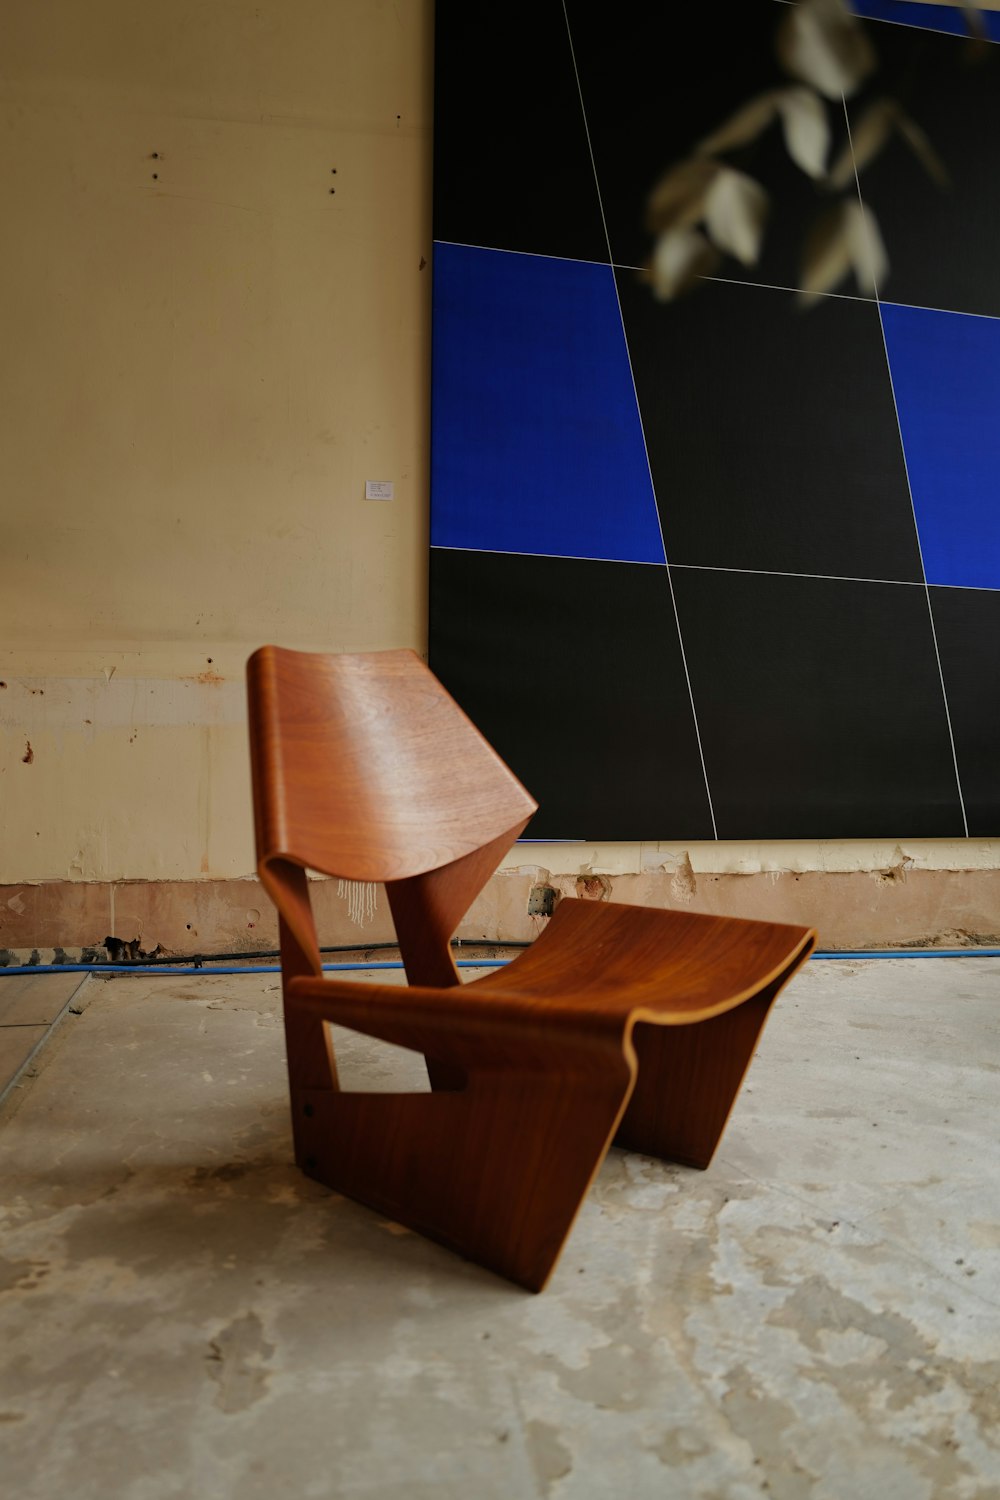 brown wooden chair beside blue and white wall